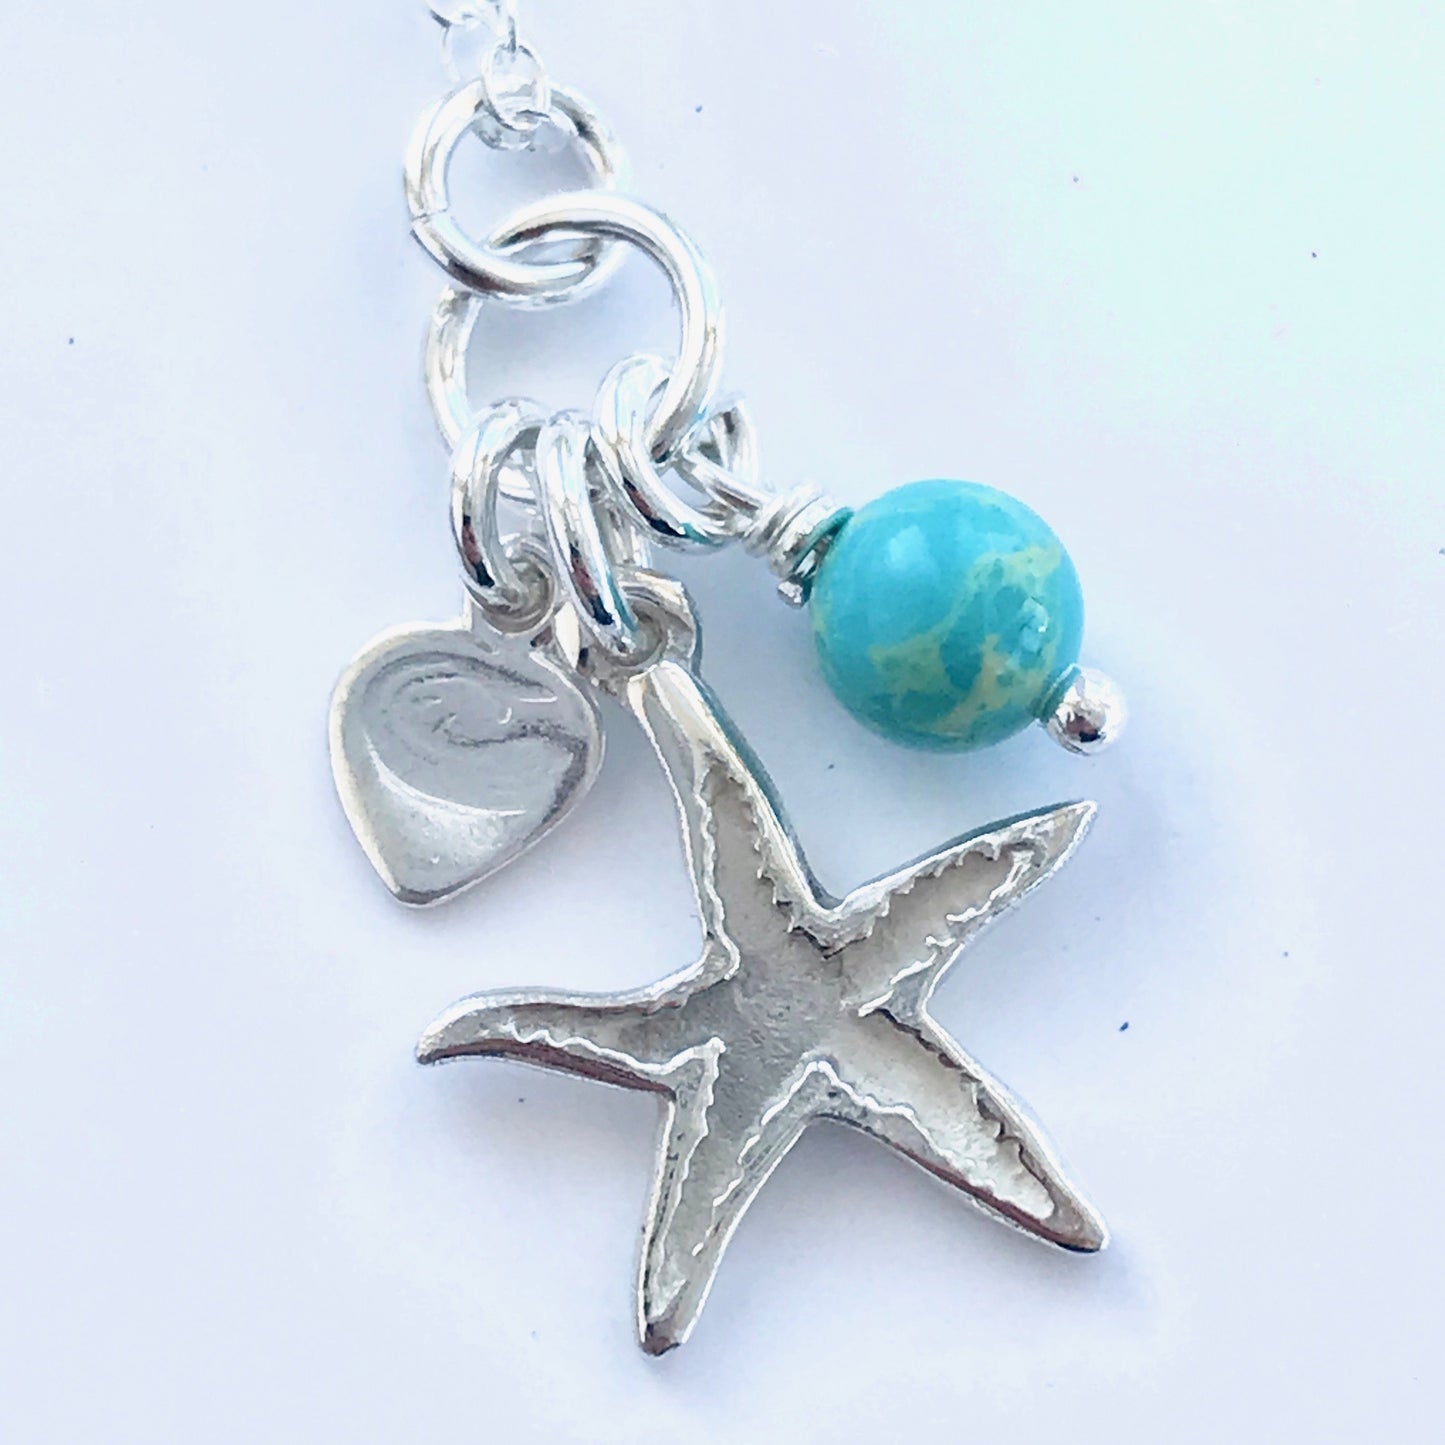 starfish necklace with turquoise